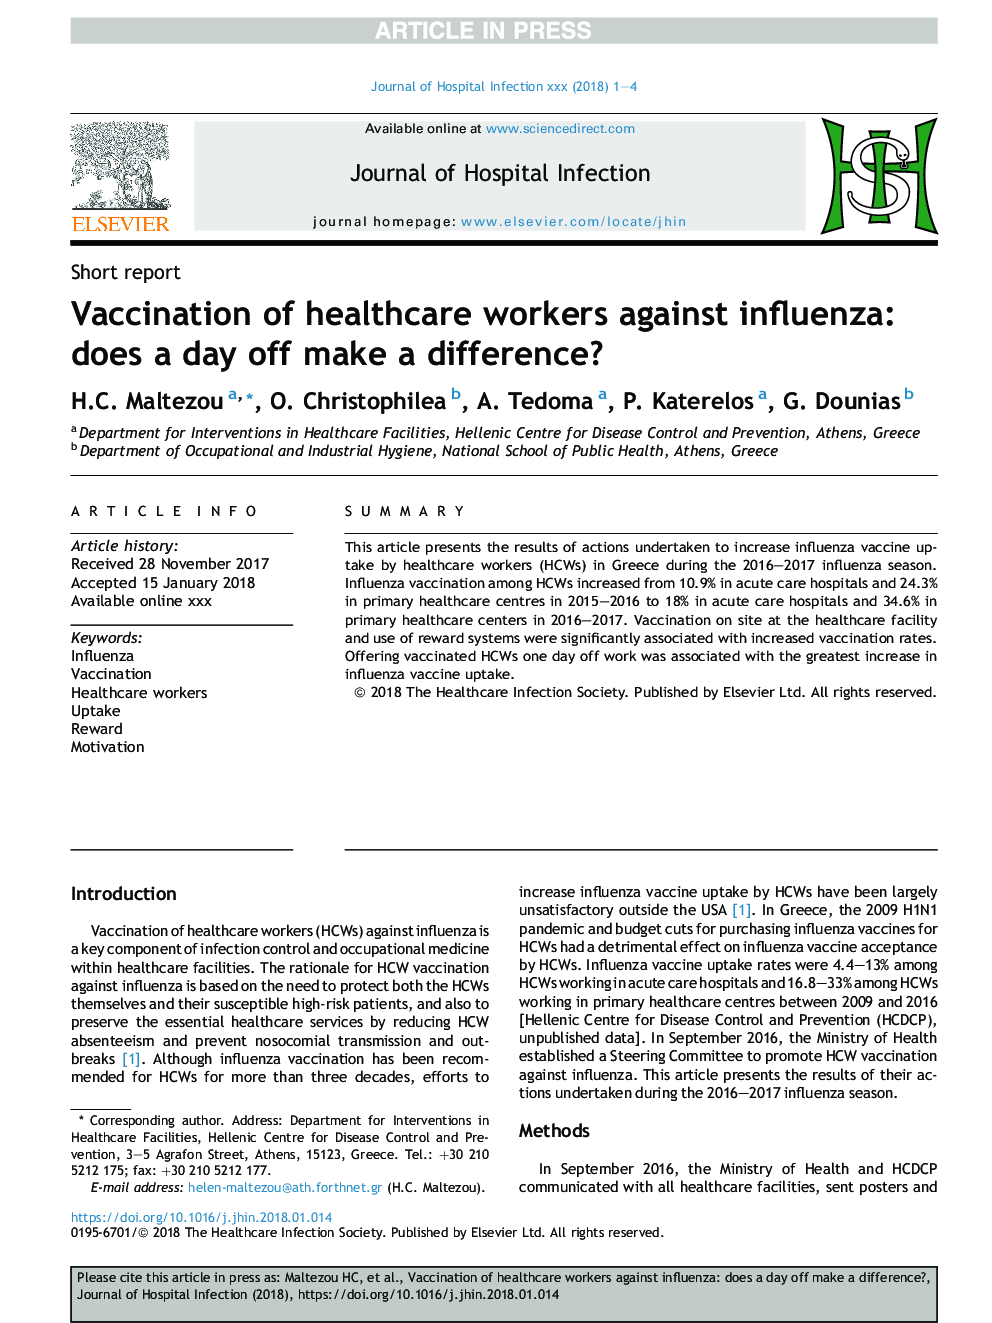 Vaccination of healthcare workers against influenza: does a day off make a difference?